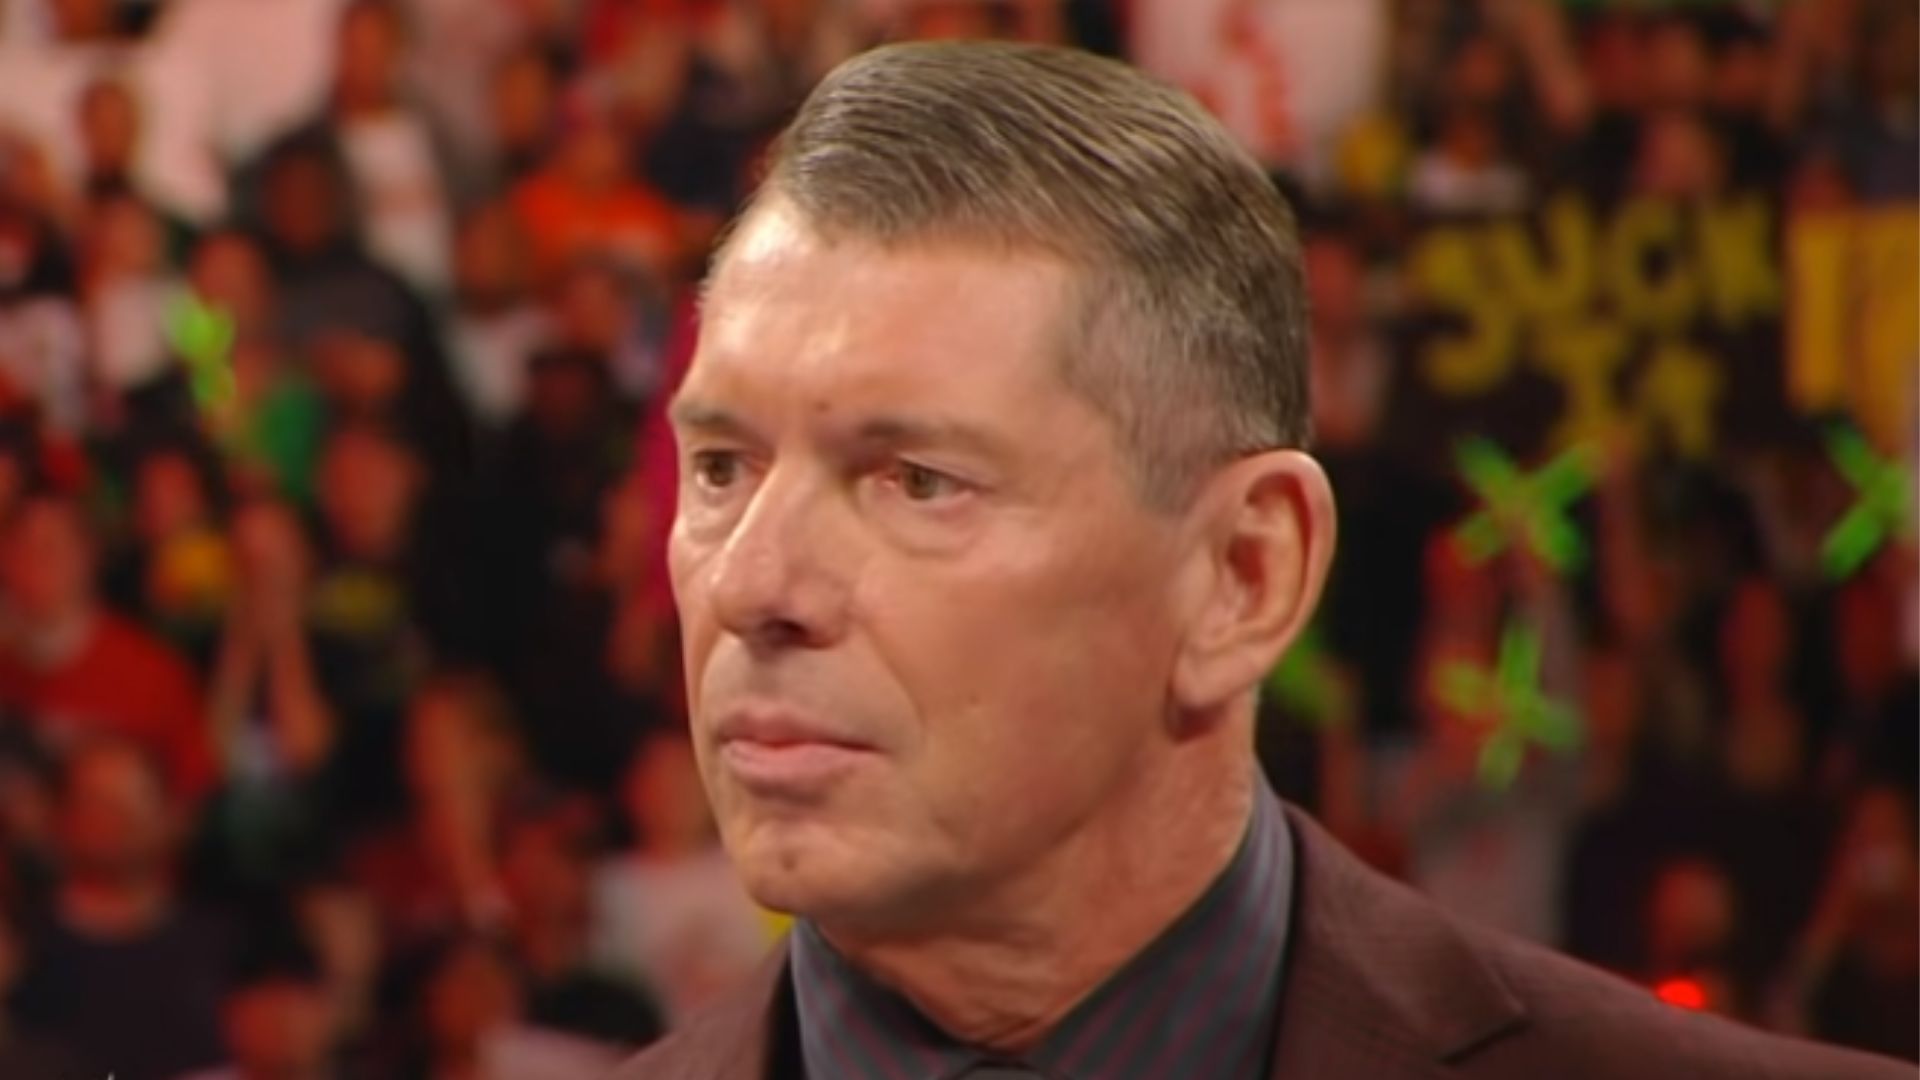 Vince McMahon has the final say on WWE match outcomes and storyline developments.